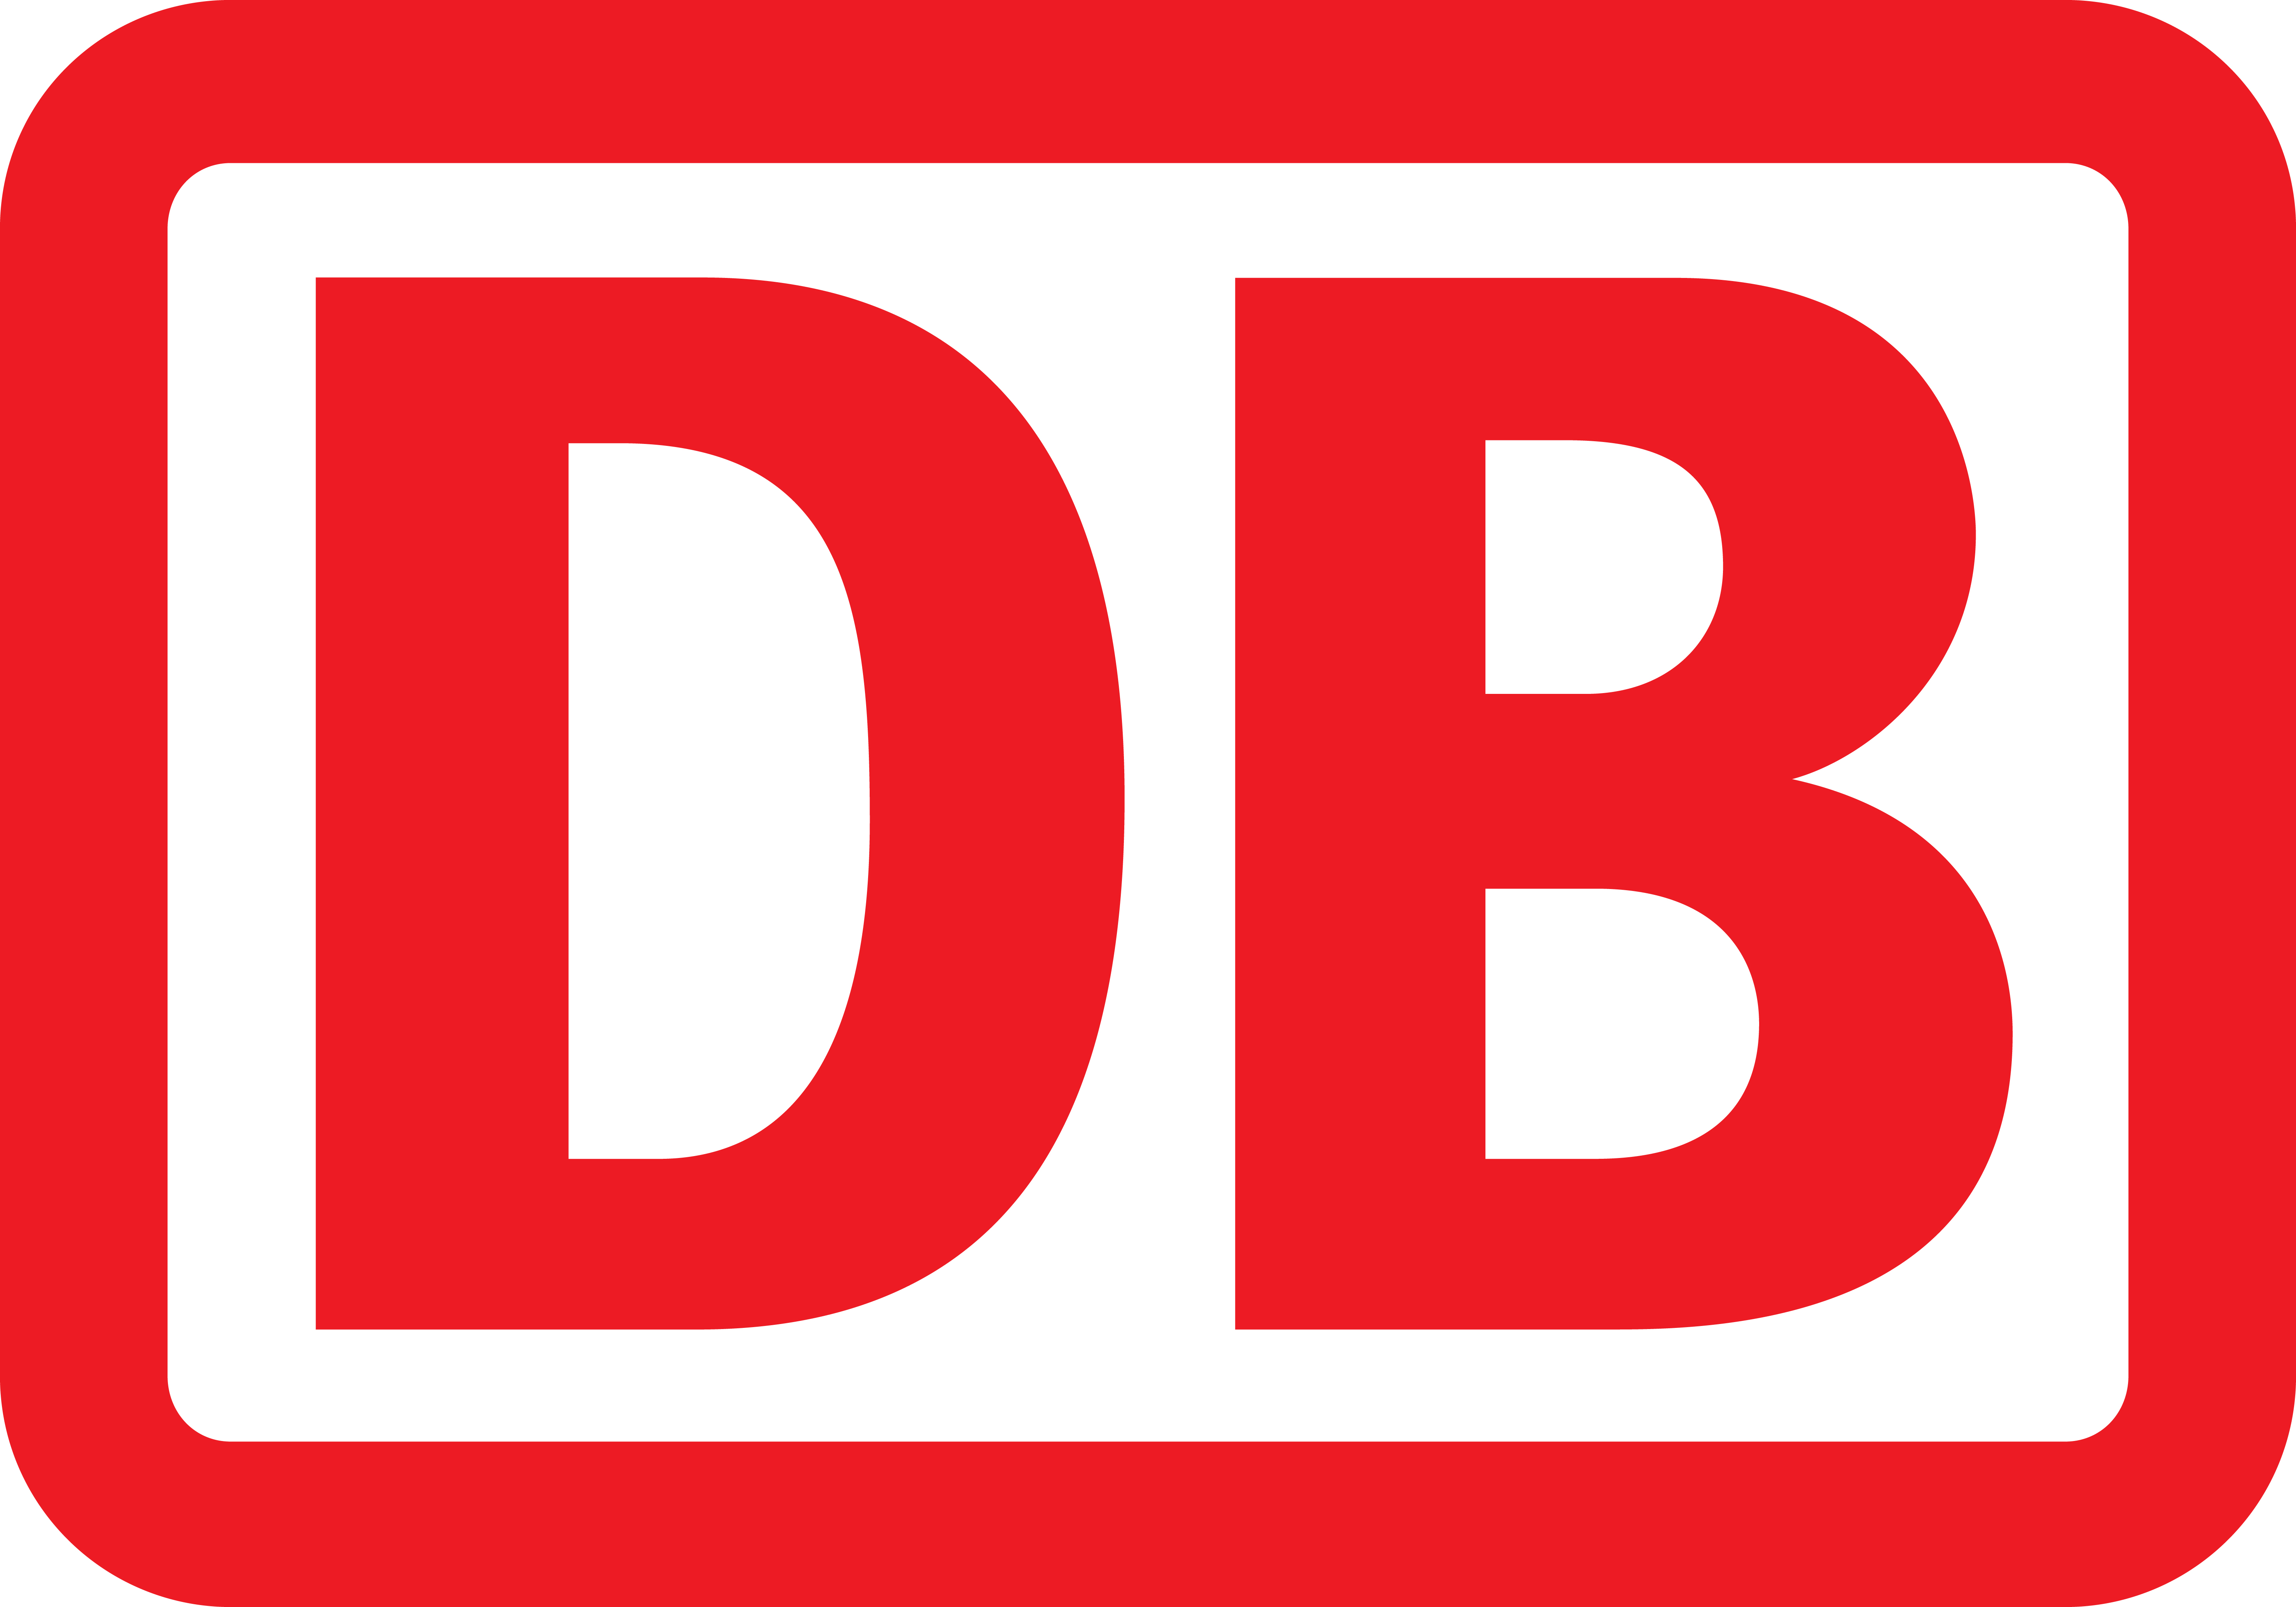 DB Management Consulting